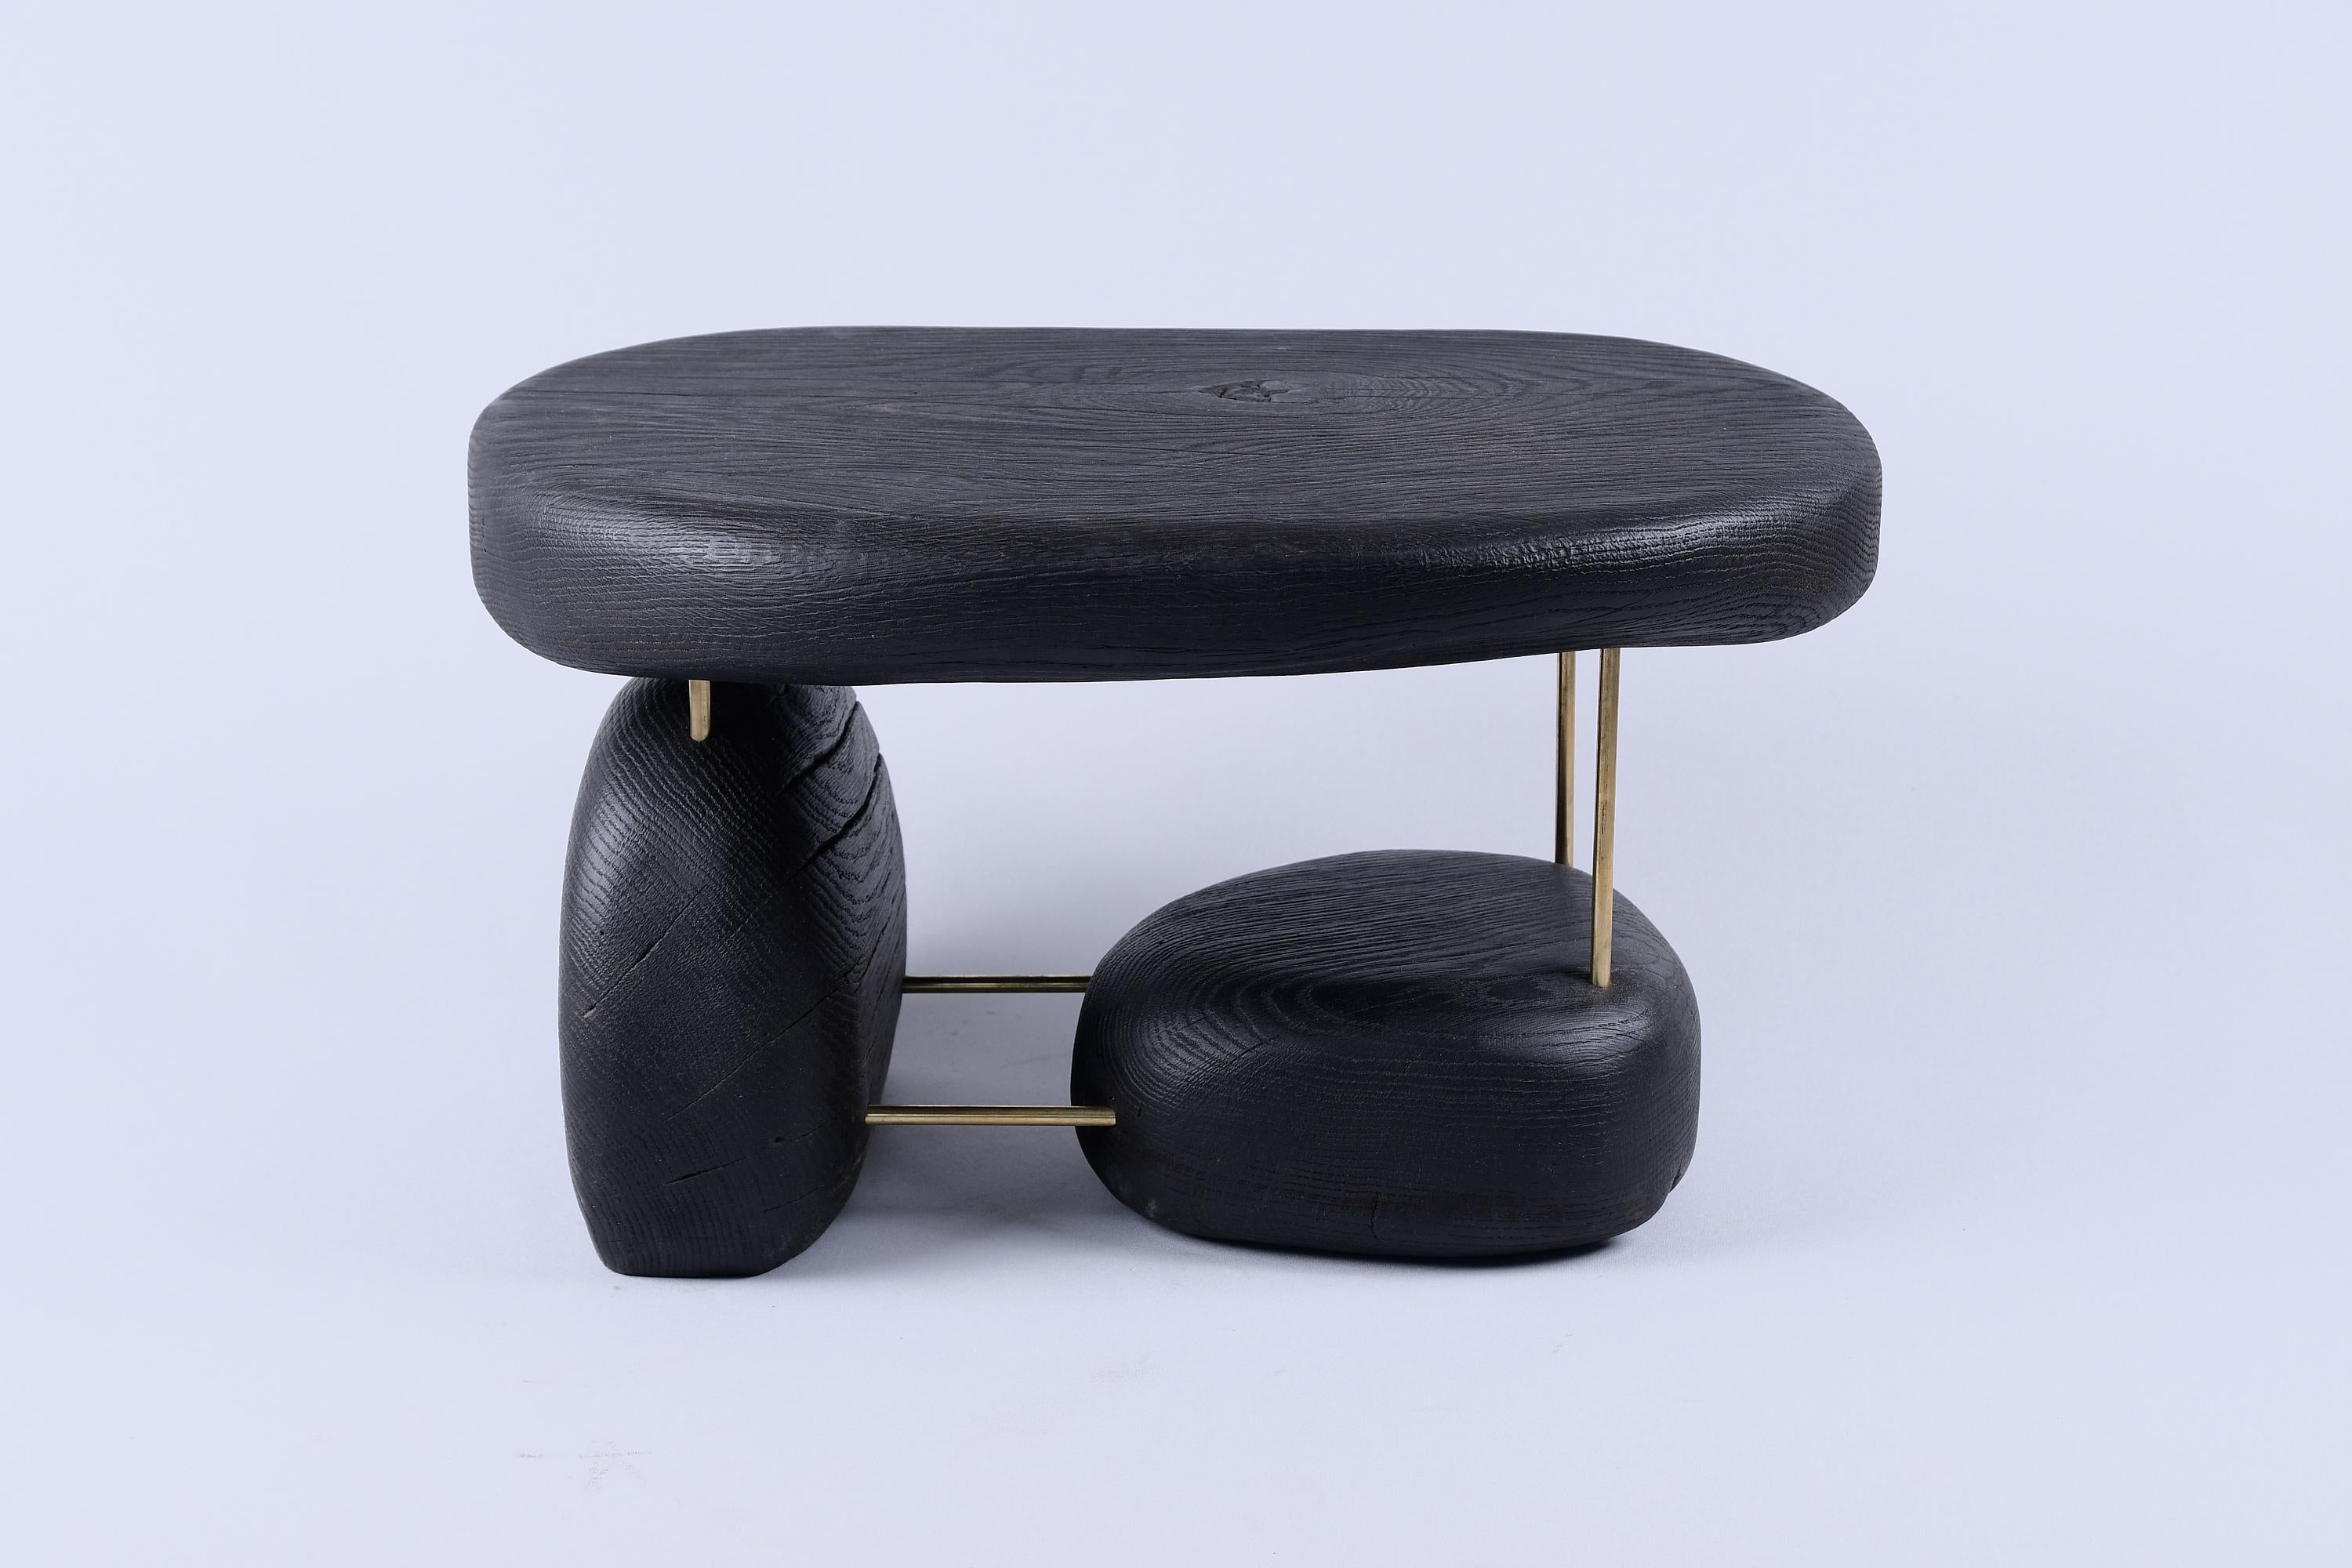 Unique wooden multifunctional piece usable as a side table, stool, or simply as a decorative object. It is build in combination of high quality burnt oak with brass, and protected with the highest quality oils, ensuring durability for generations.